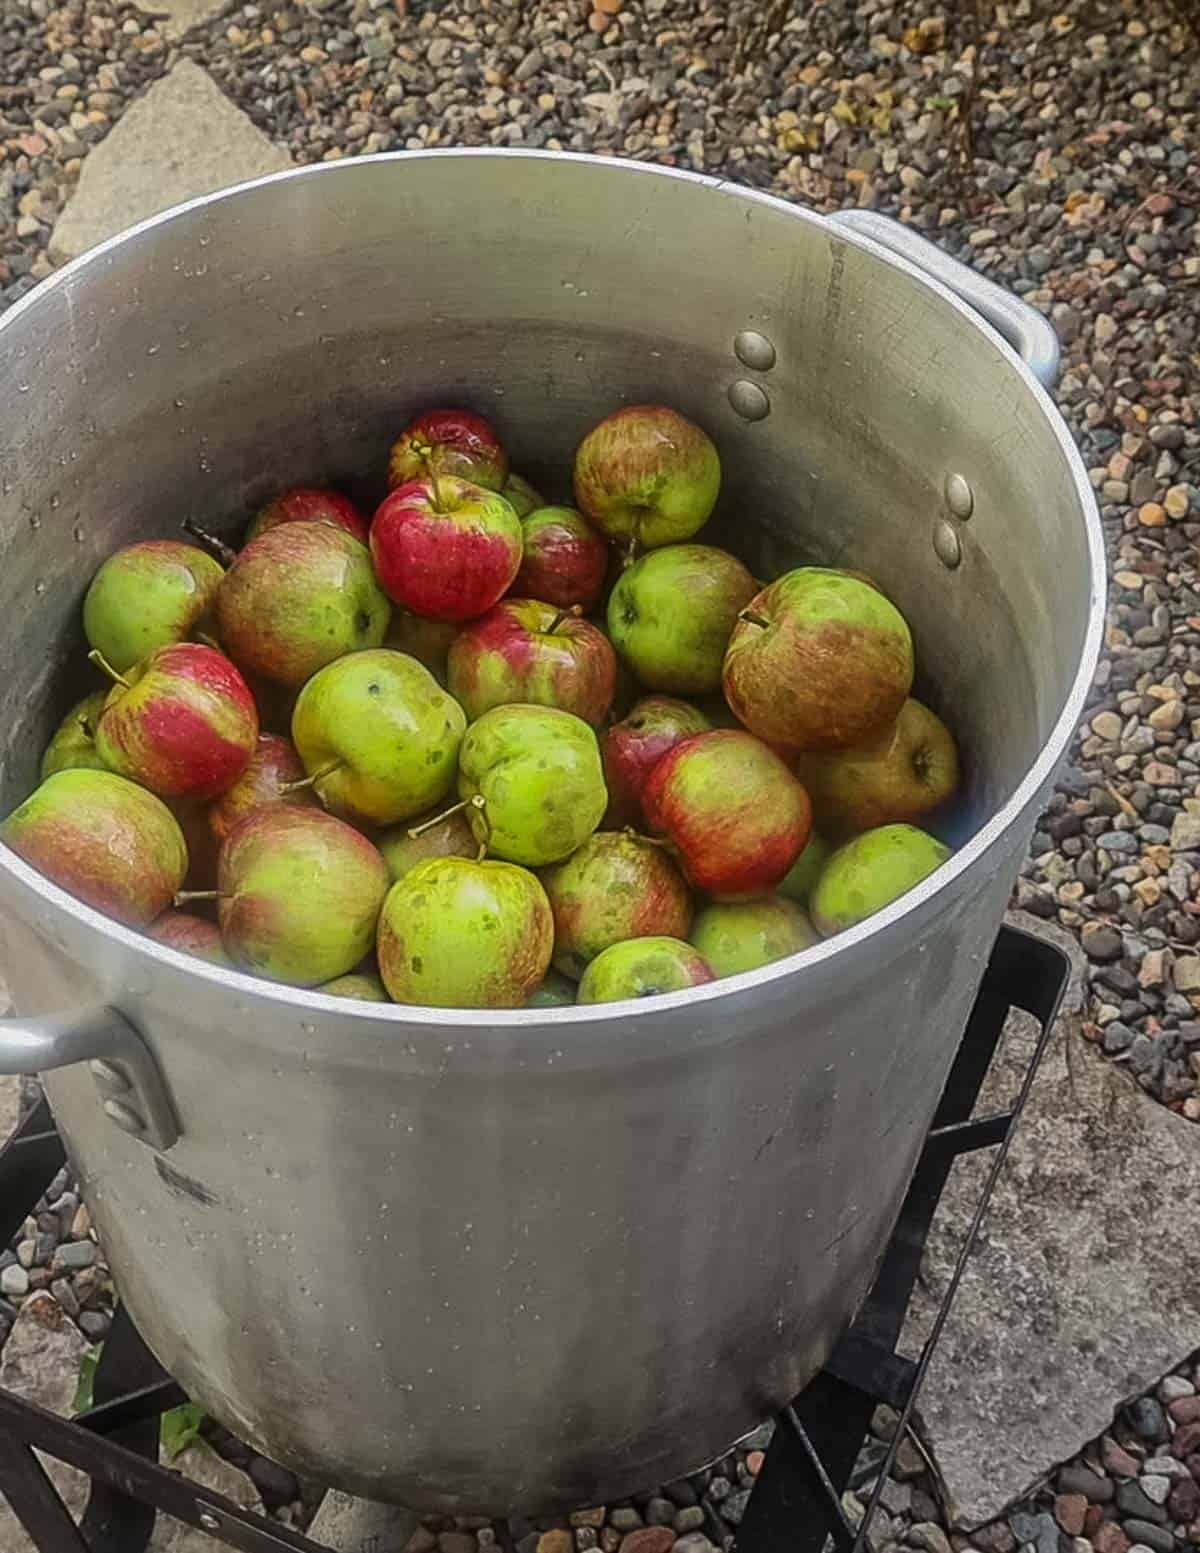 A large pot on a propane burner filled with wild apples.